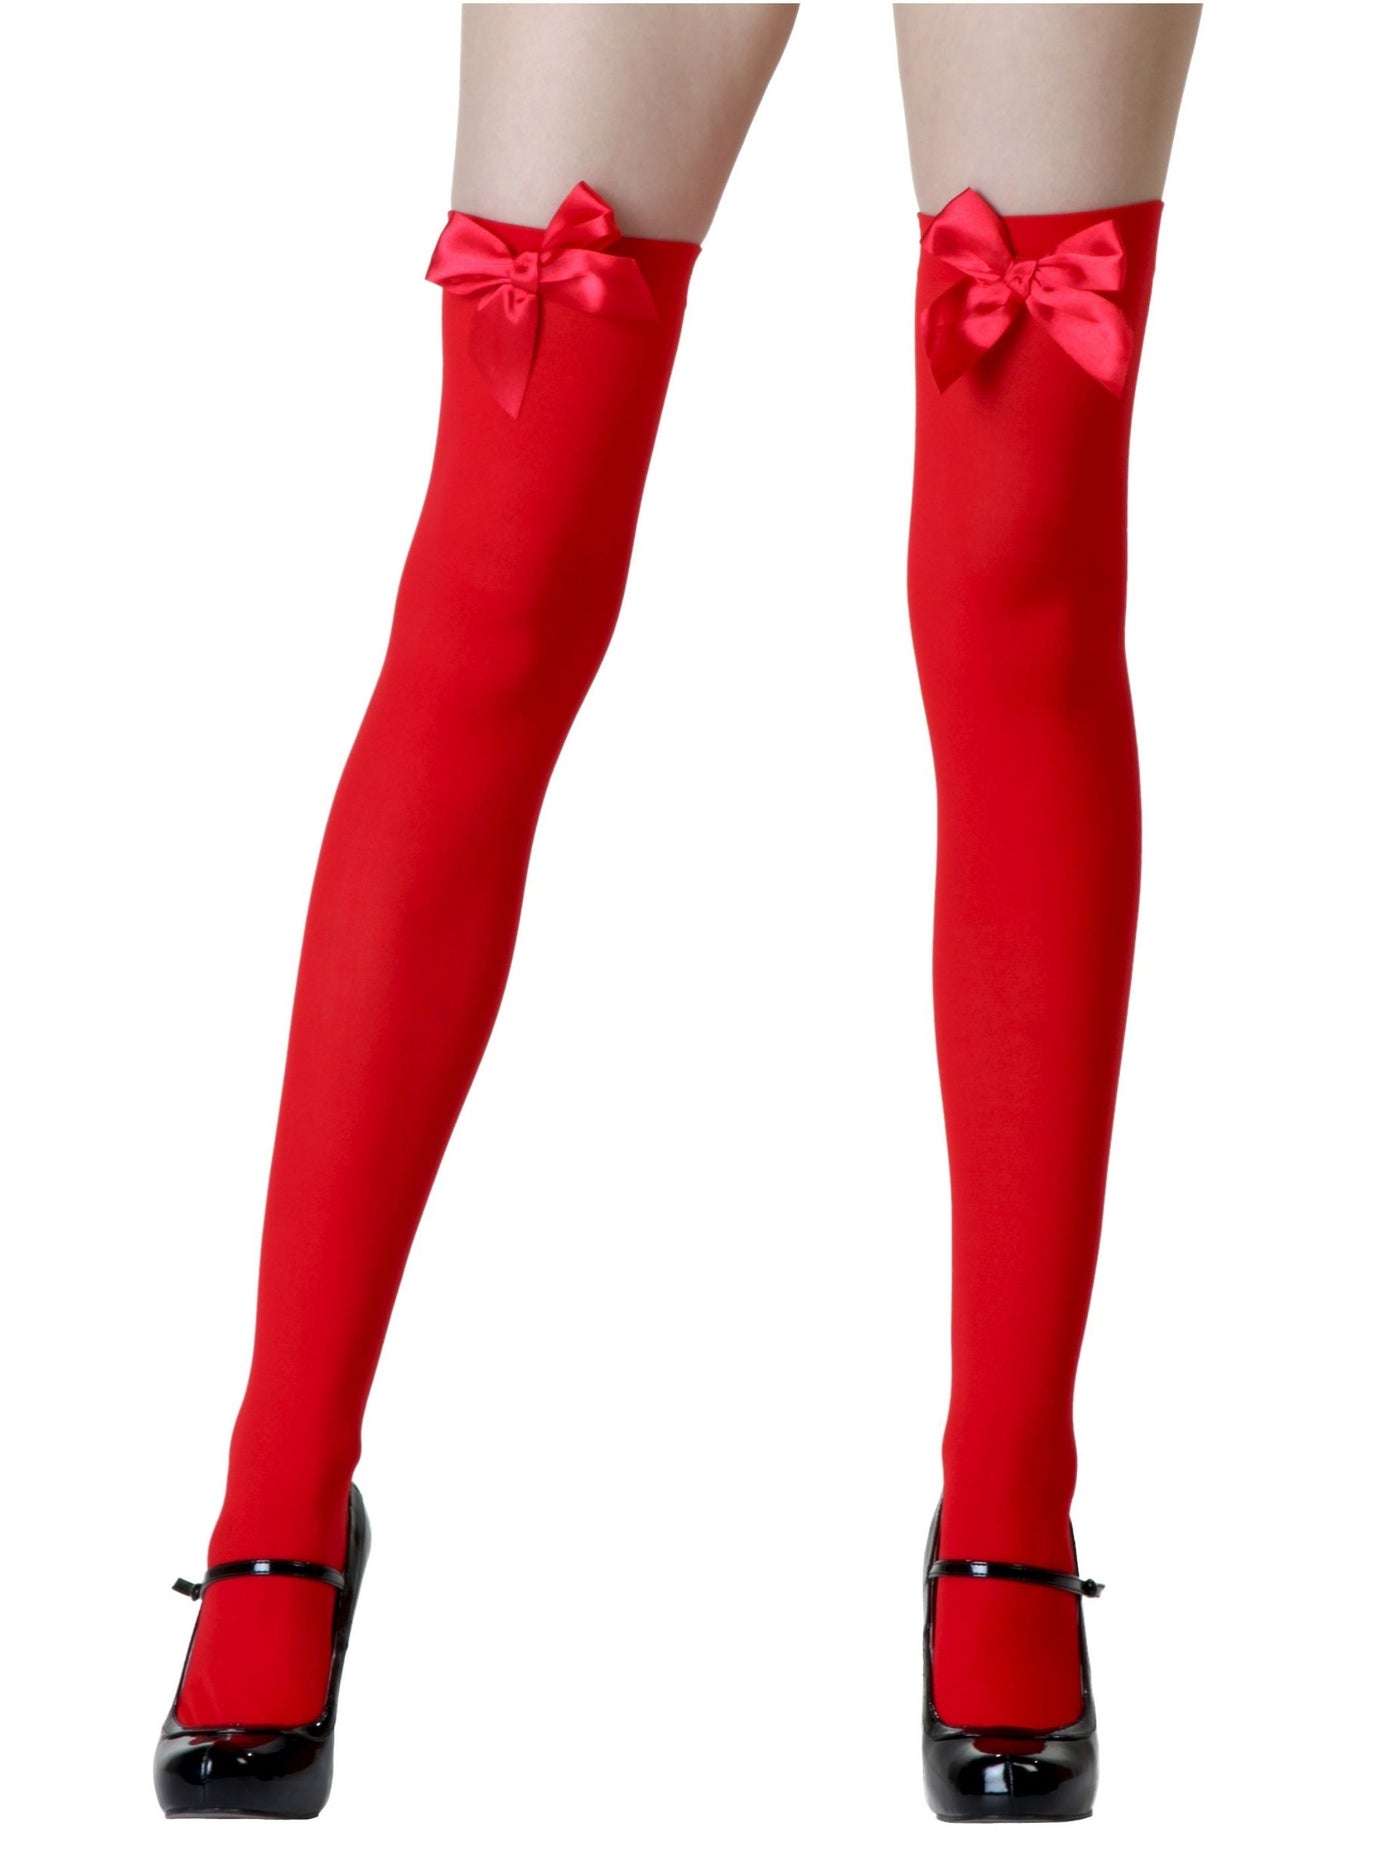 Red Opaque Thigh High Stockings with Satin Bows